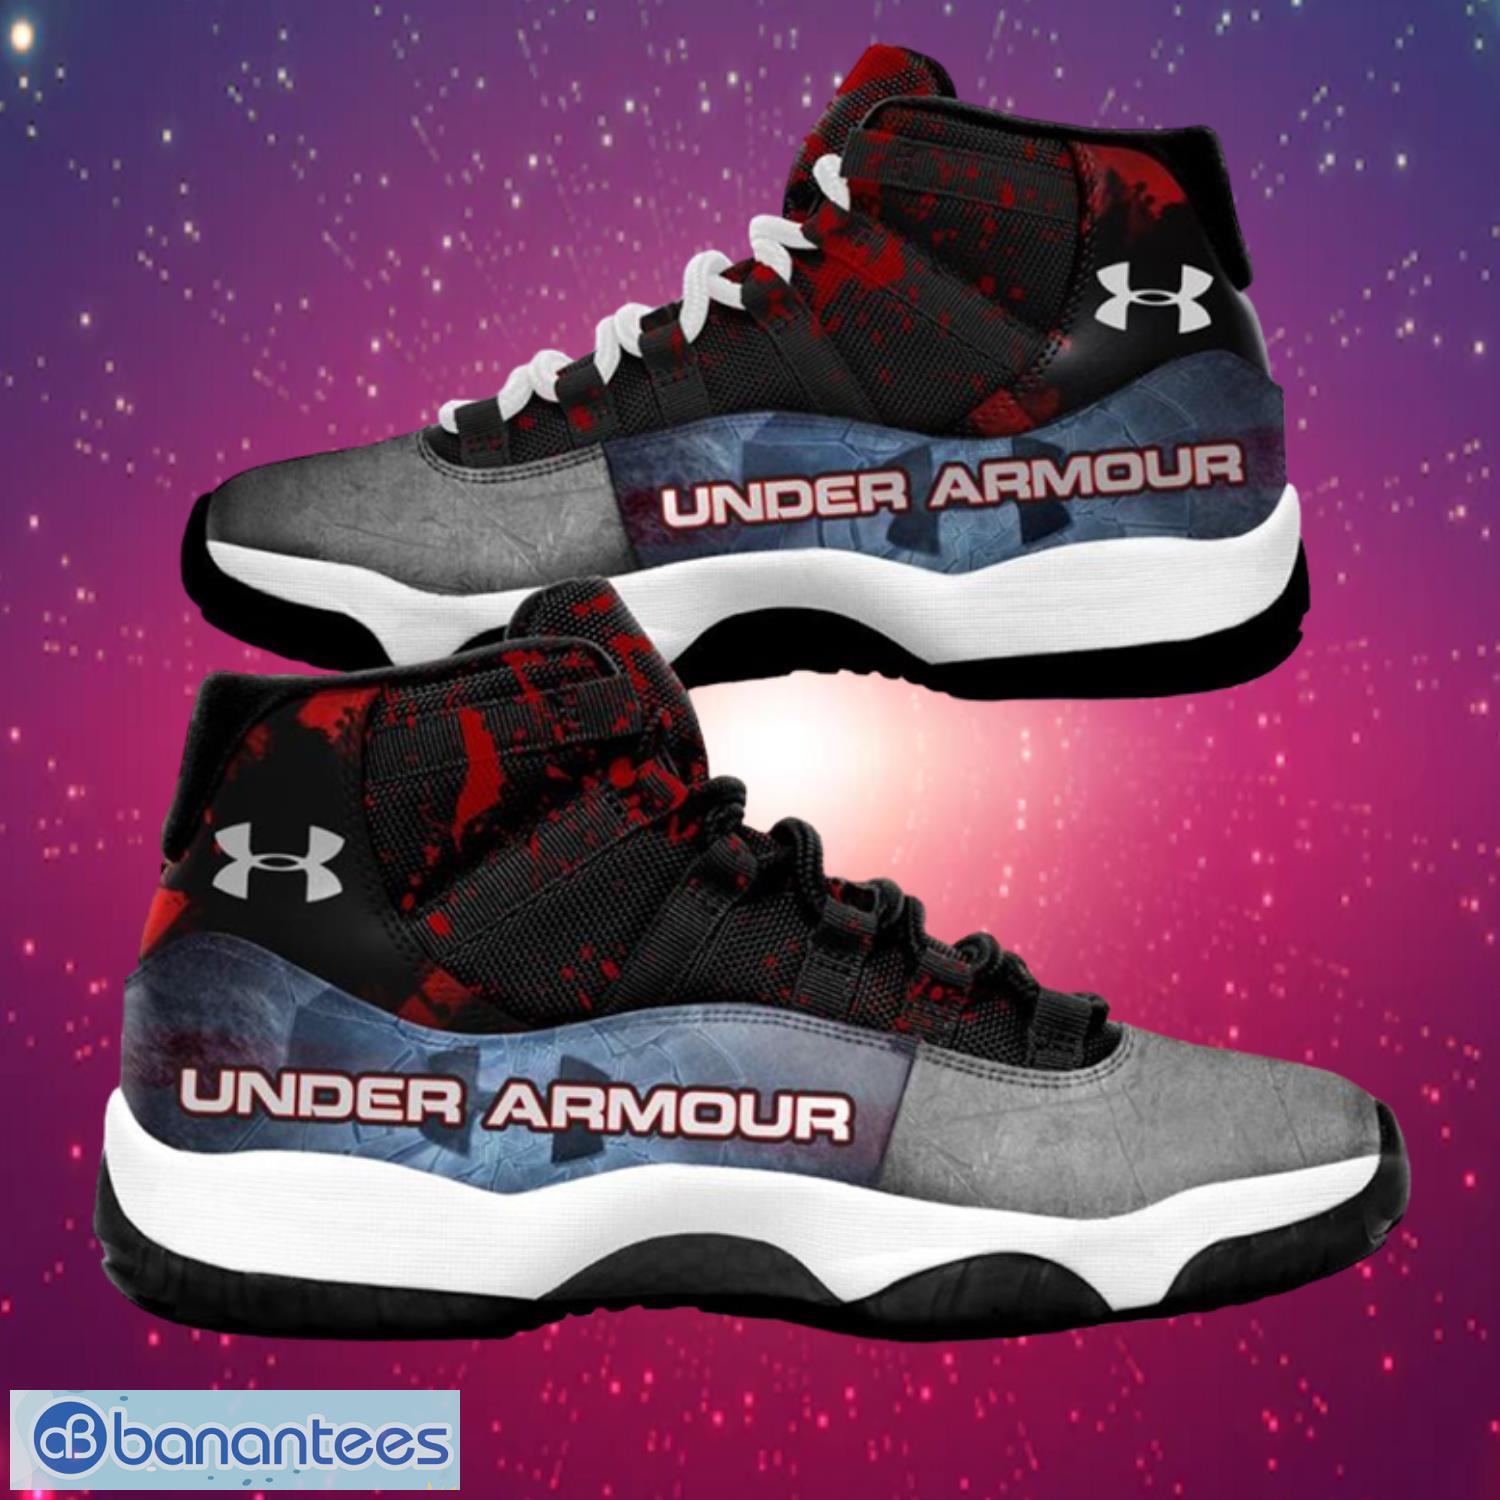 Under Armour Custom Horror Blood Stains Air Jordan 11 Shoes Product Photo 1